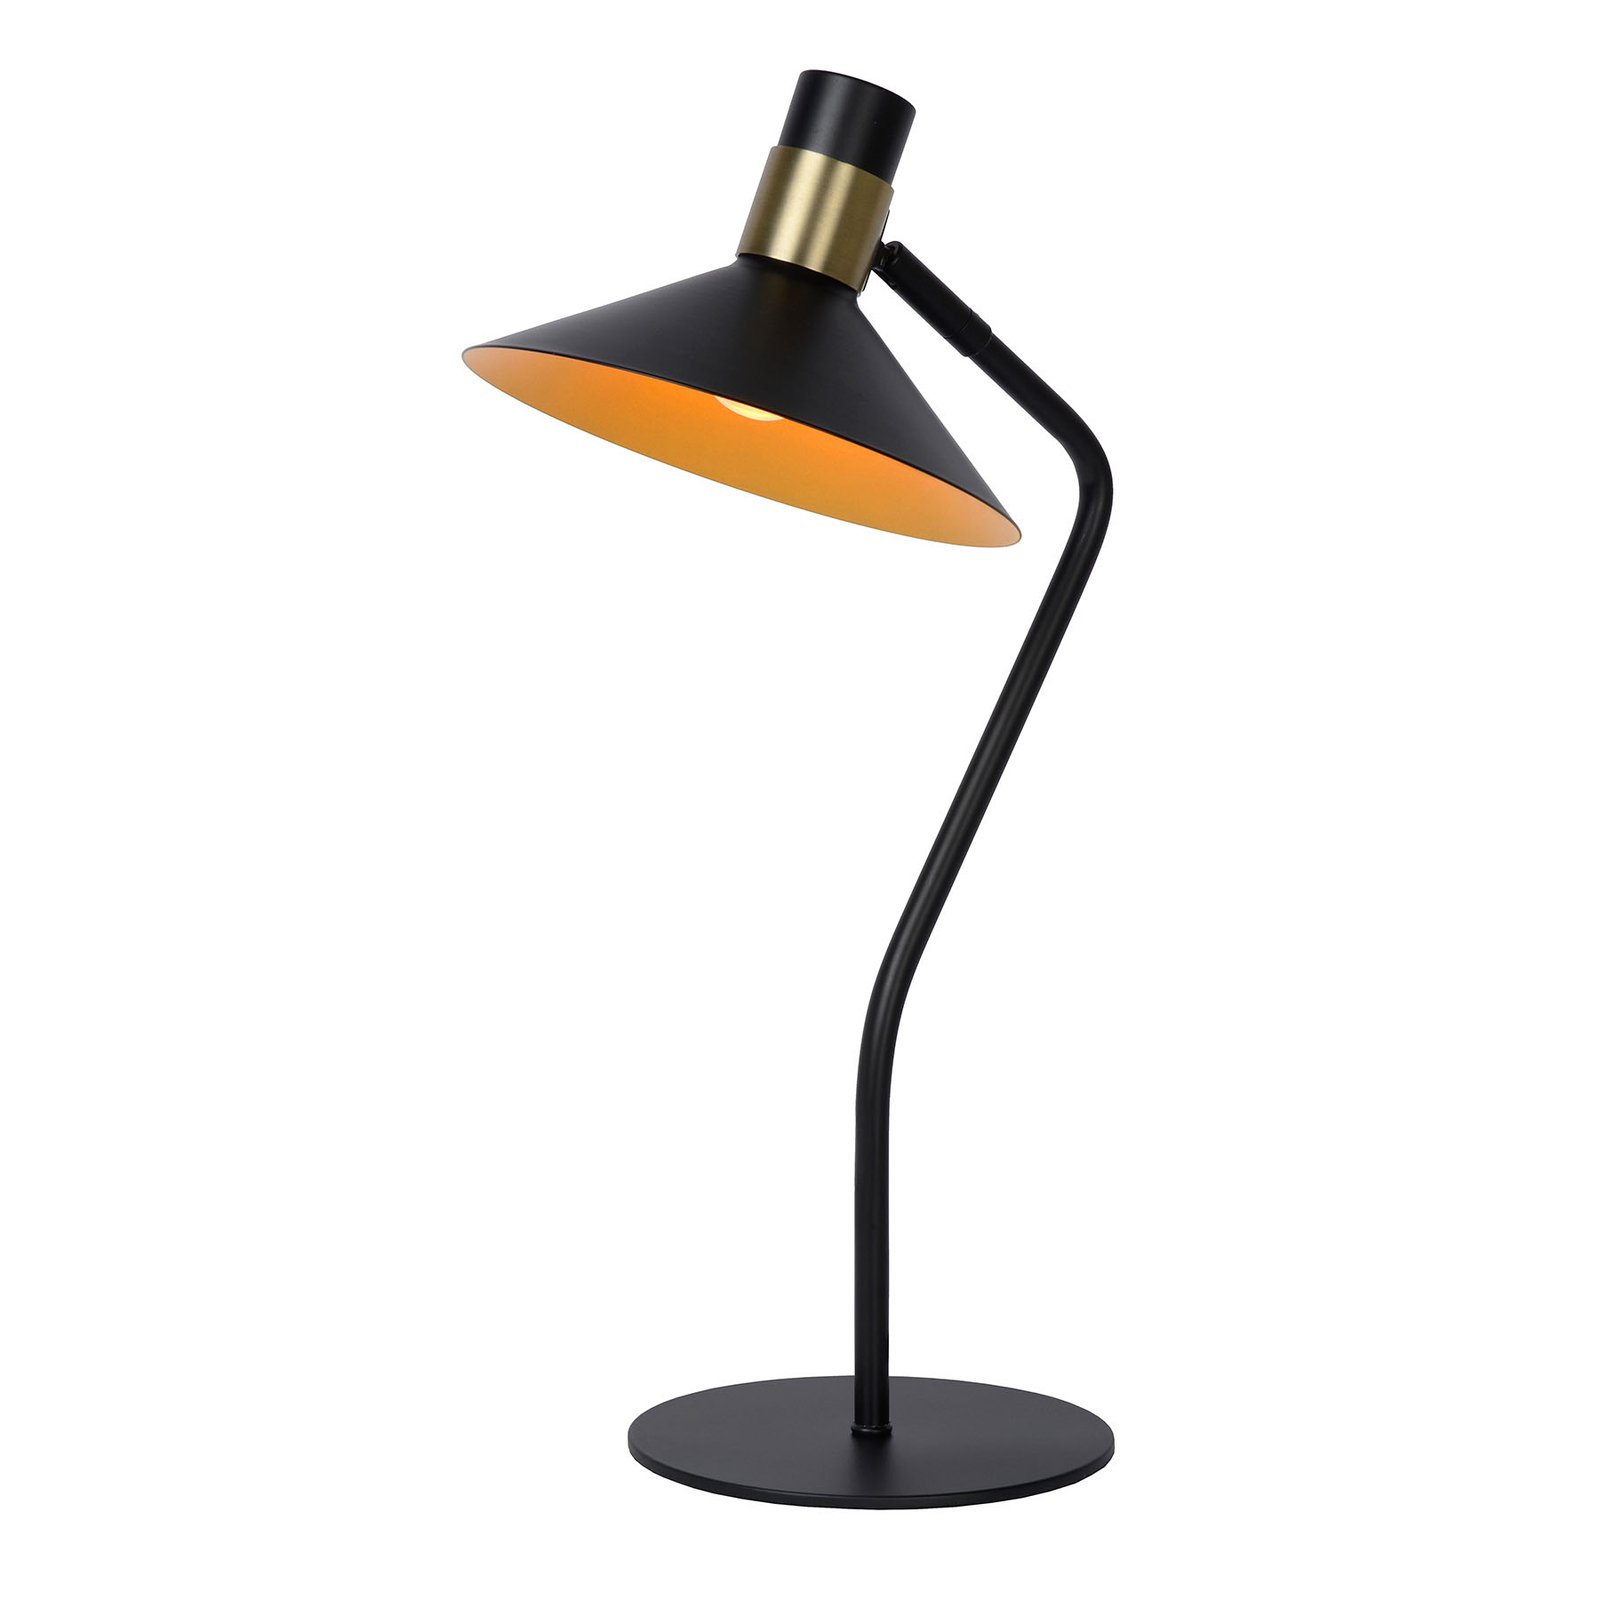 Pepijn table lamp in black and gold